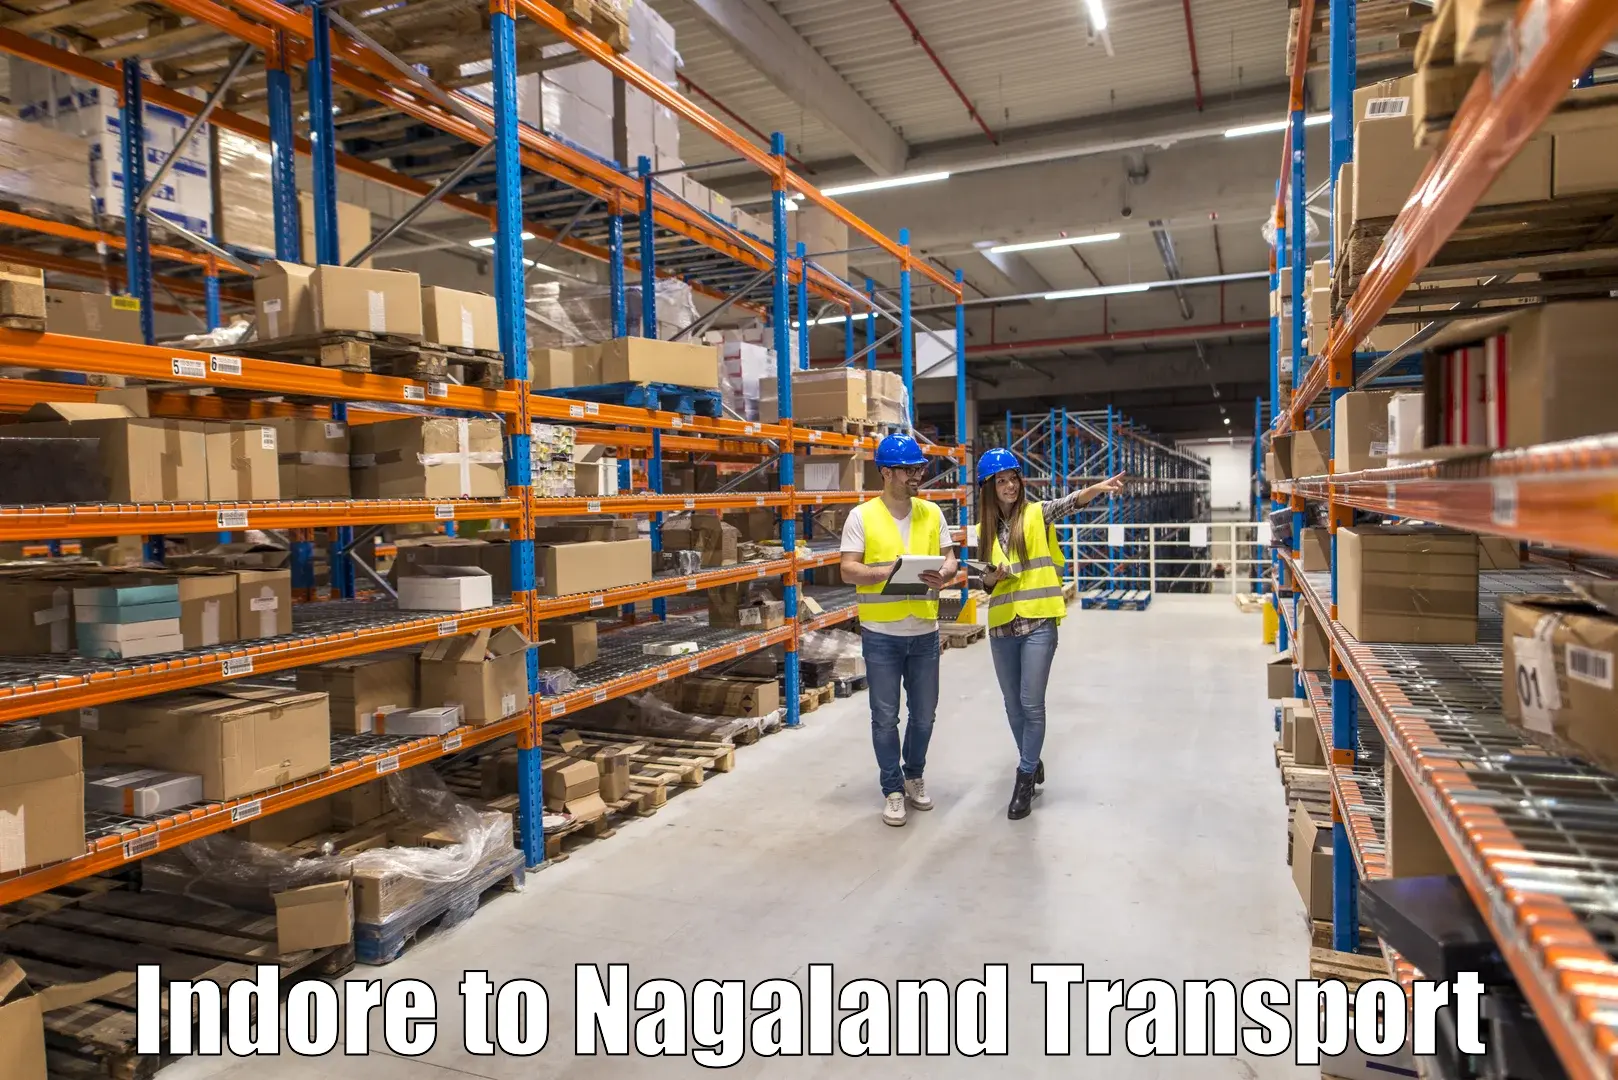 Air freight transport services Indore to Nagaland